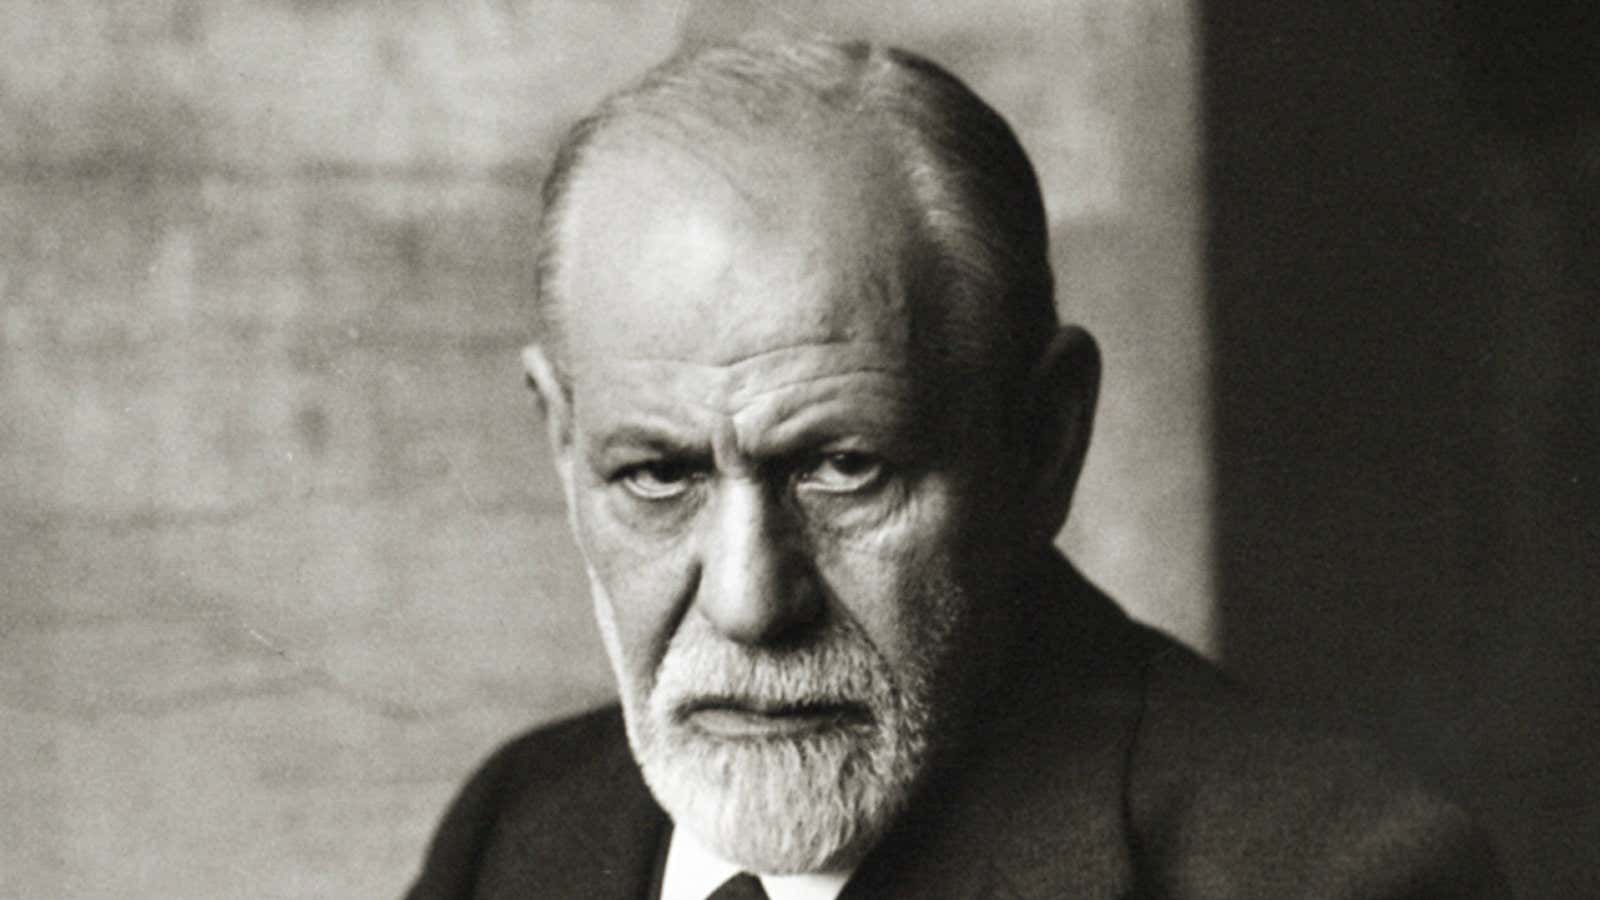 Why do we talk about Freud so much if we no longer believe in him?